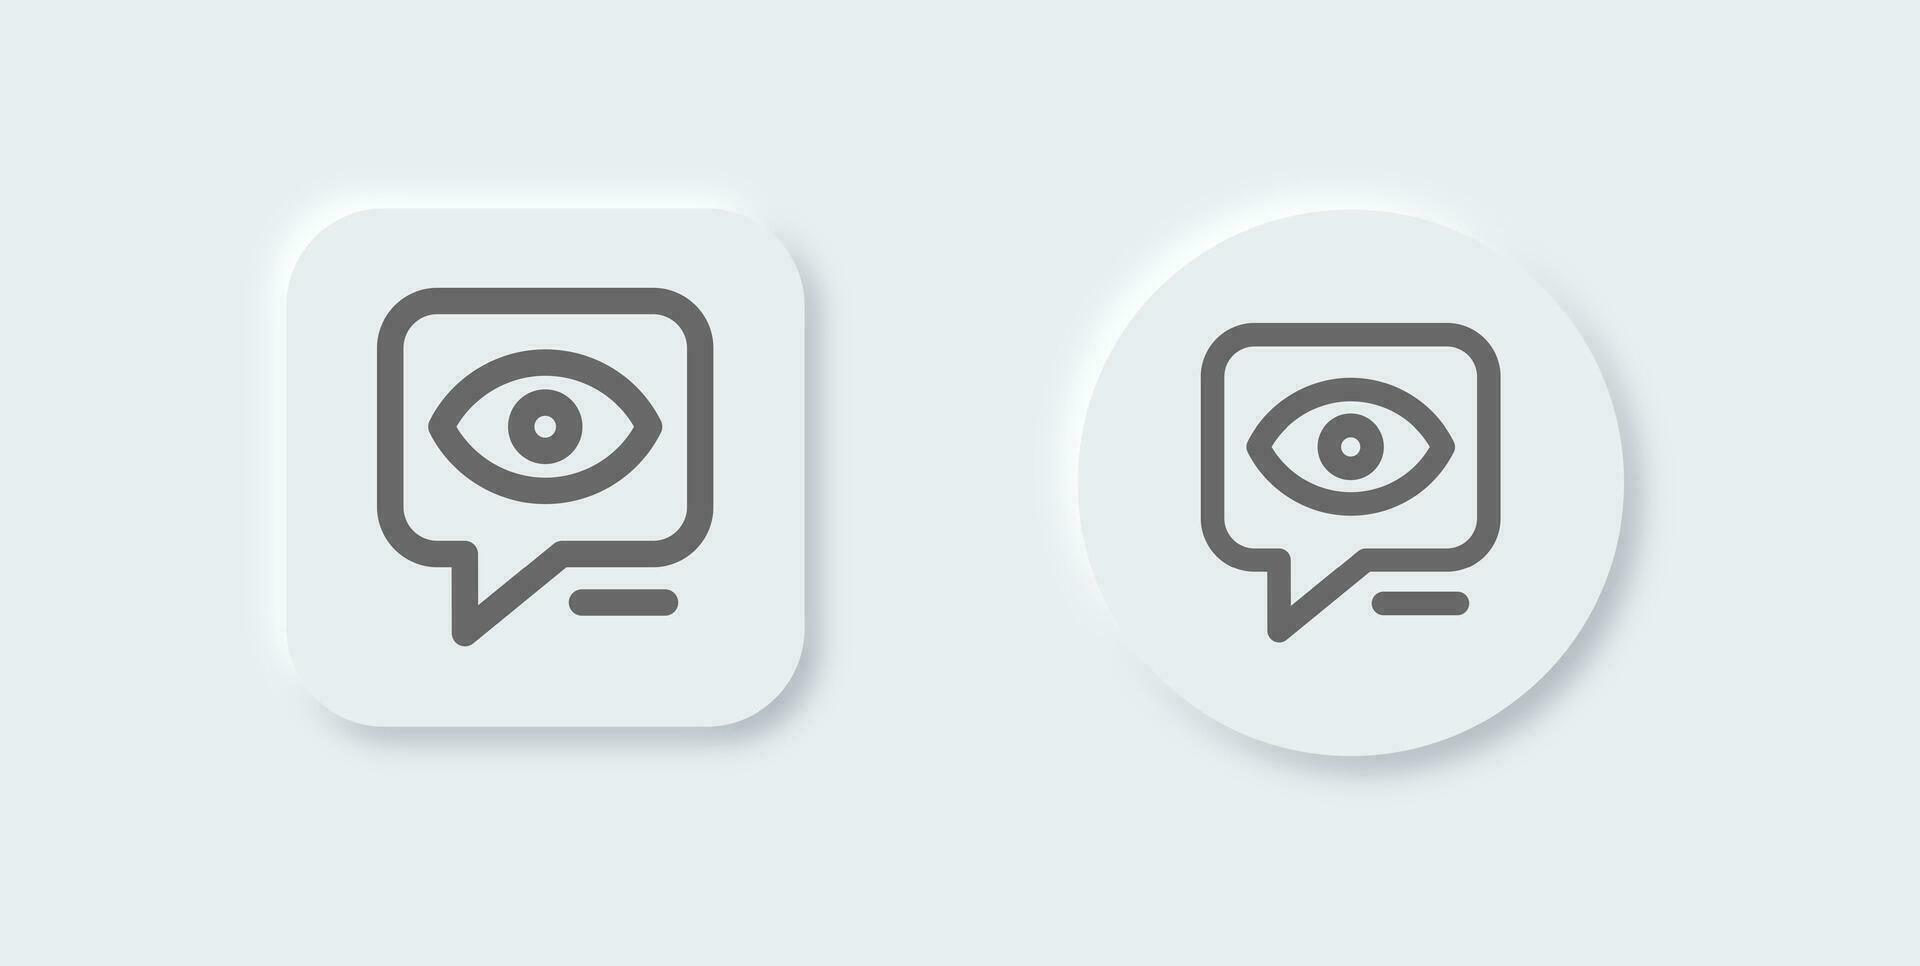 Views line icon in neomorphic design style. Eye signs vector illustration.